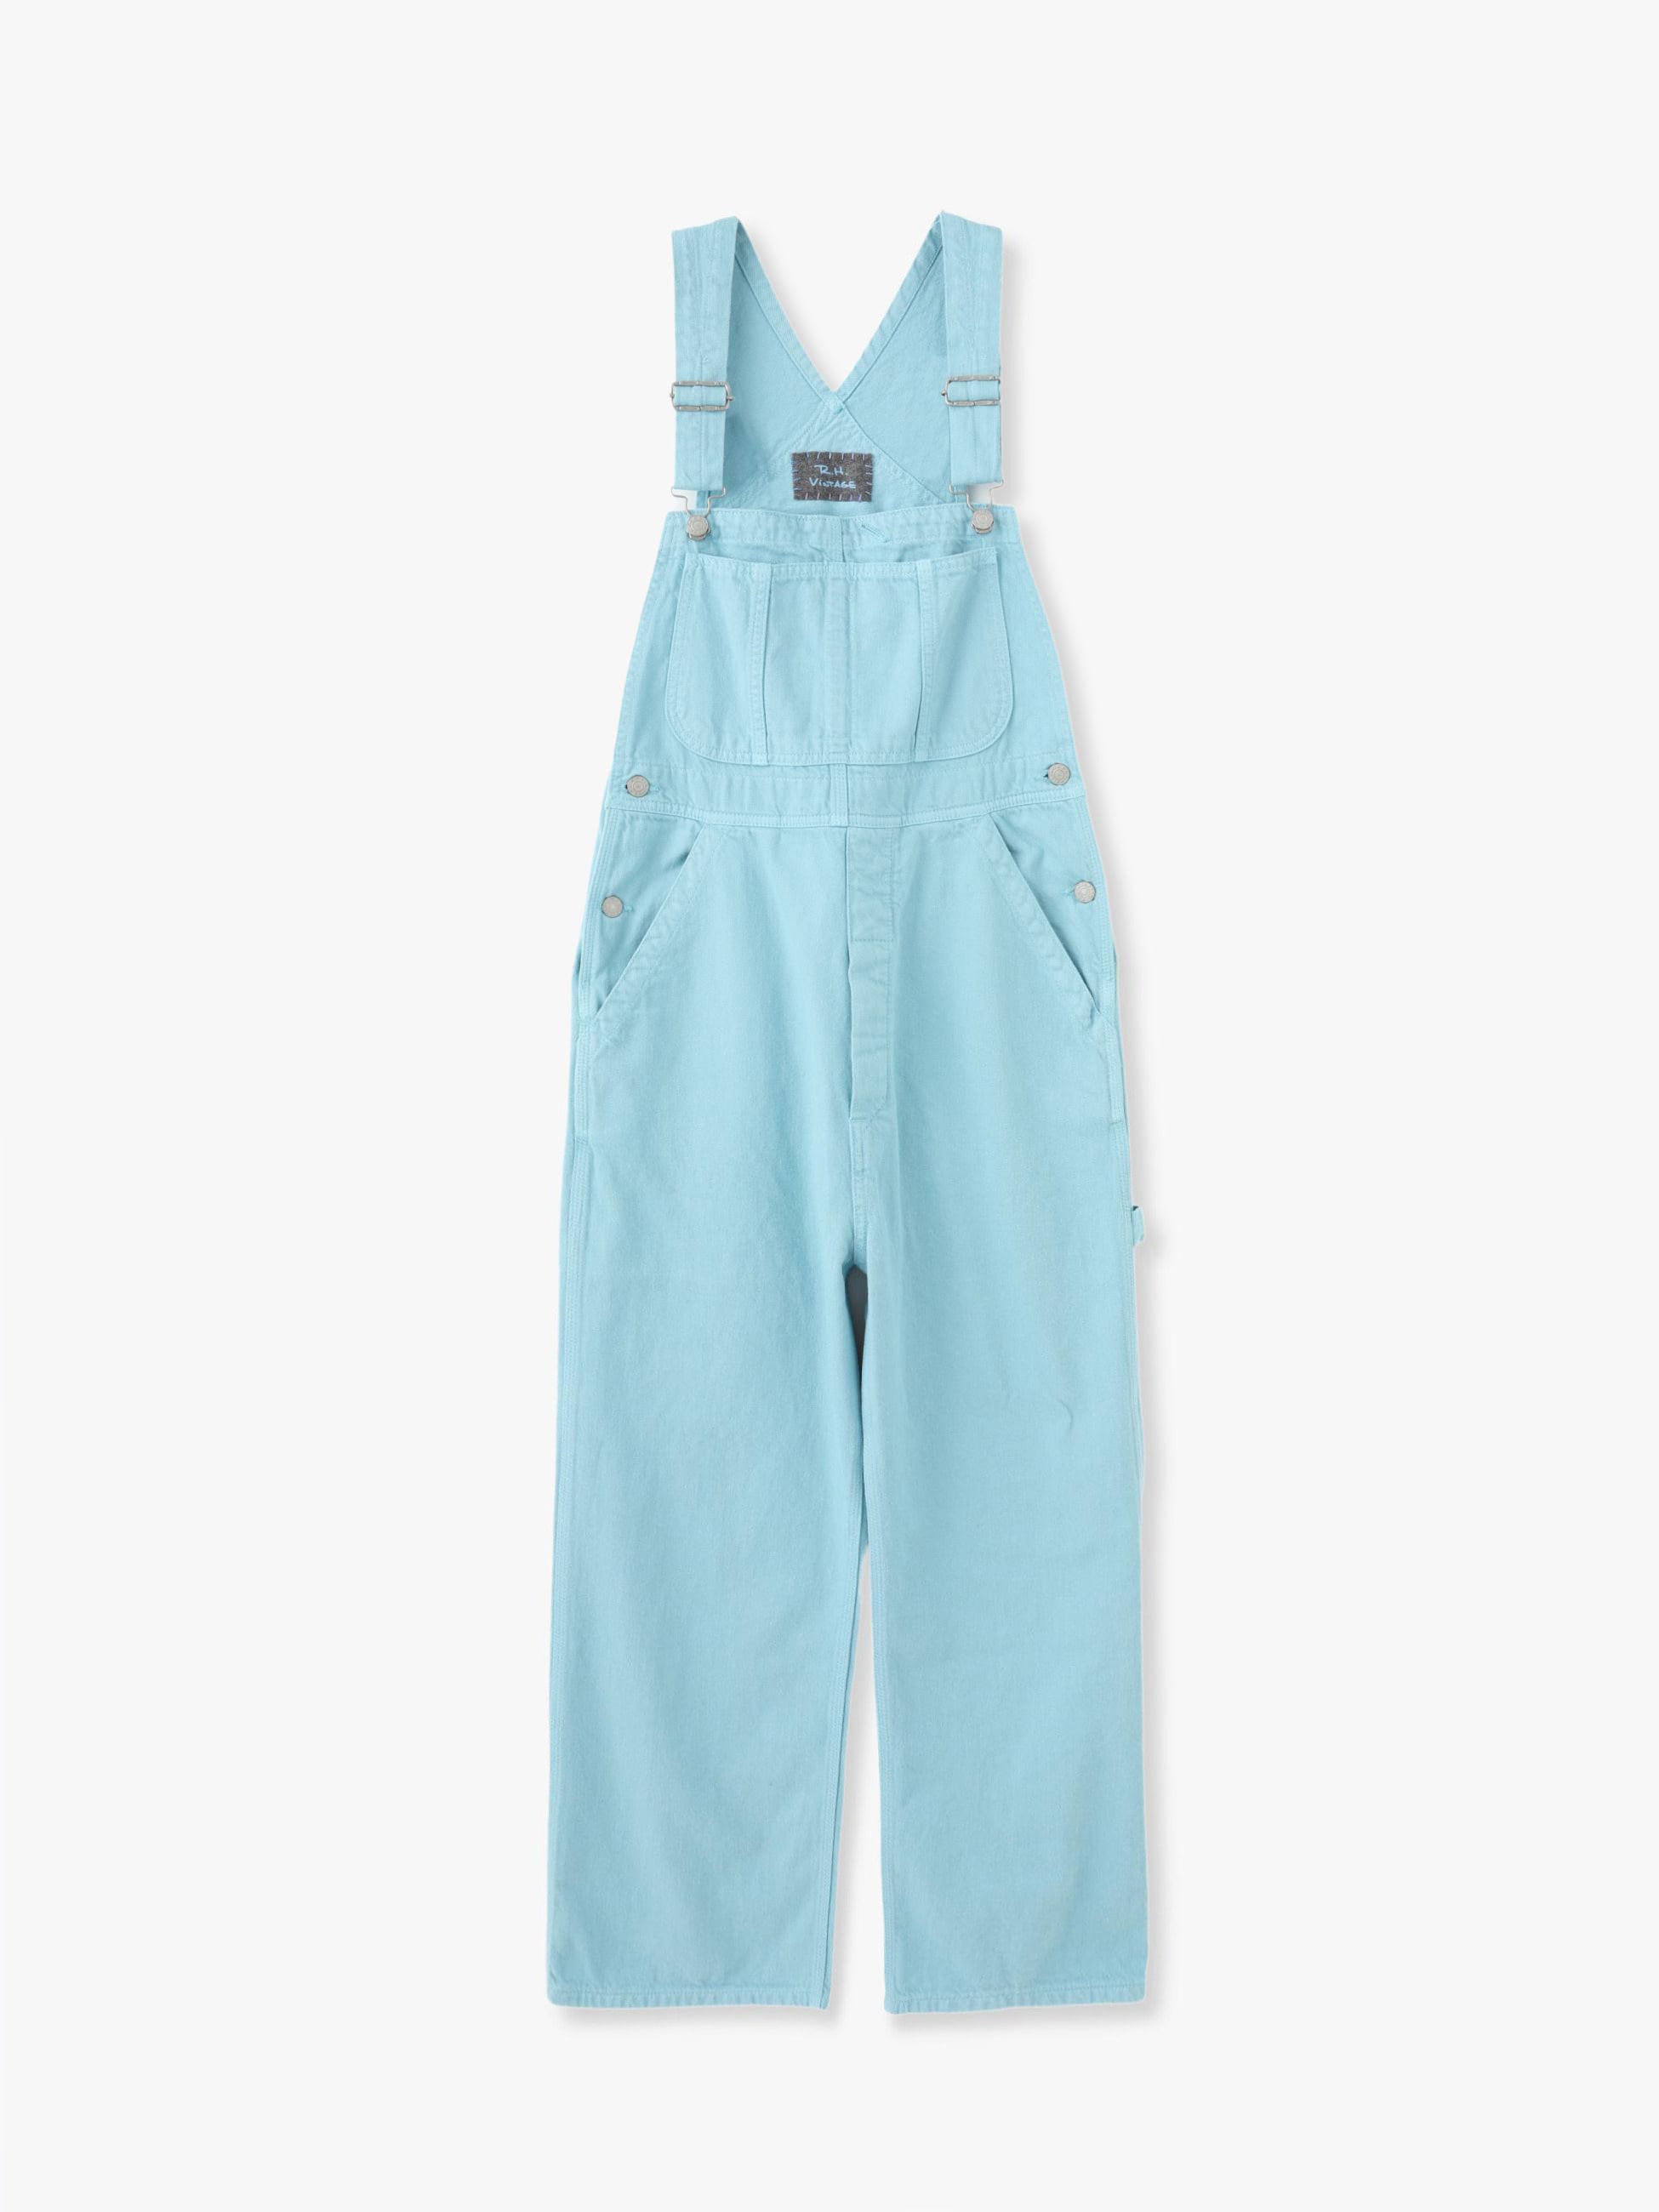 Colorful Overall